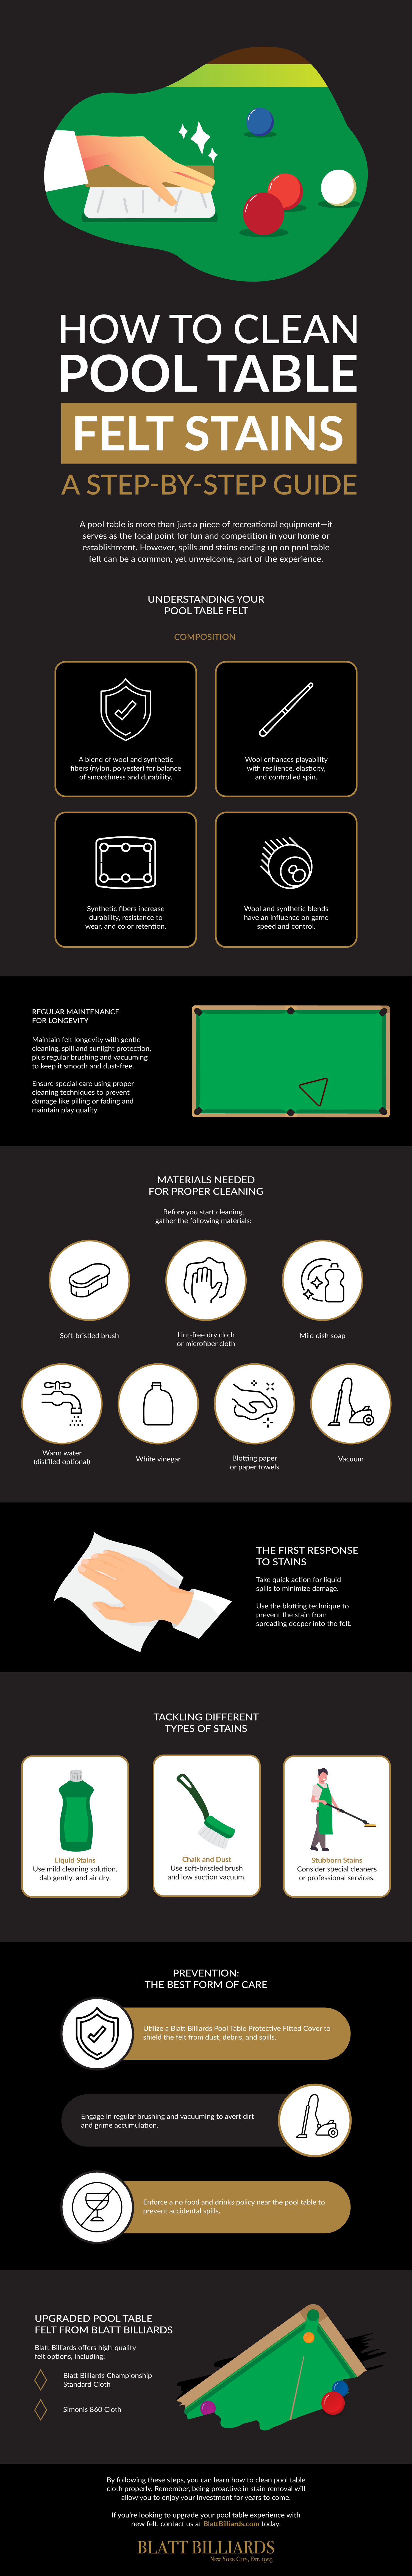 How to Clean Pool Table Felt Stains: A Step-by-Step Guide Infographic